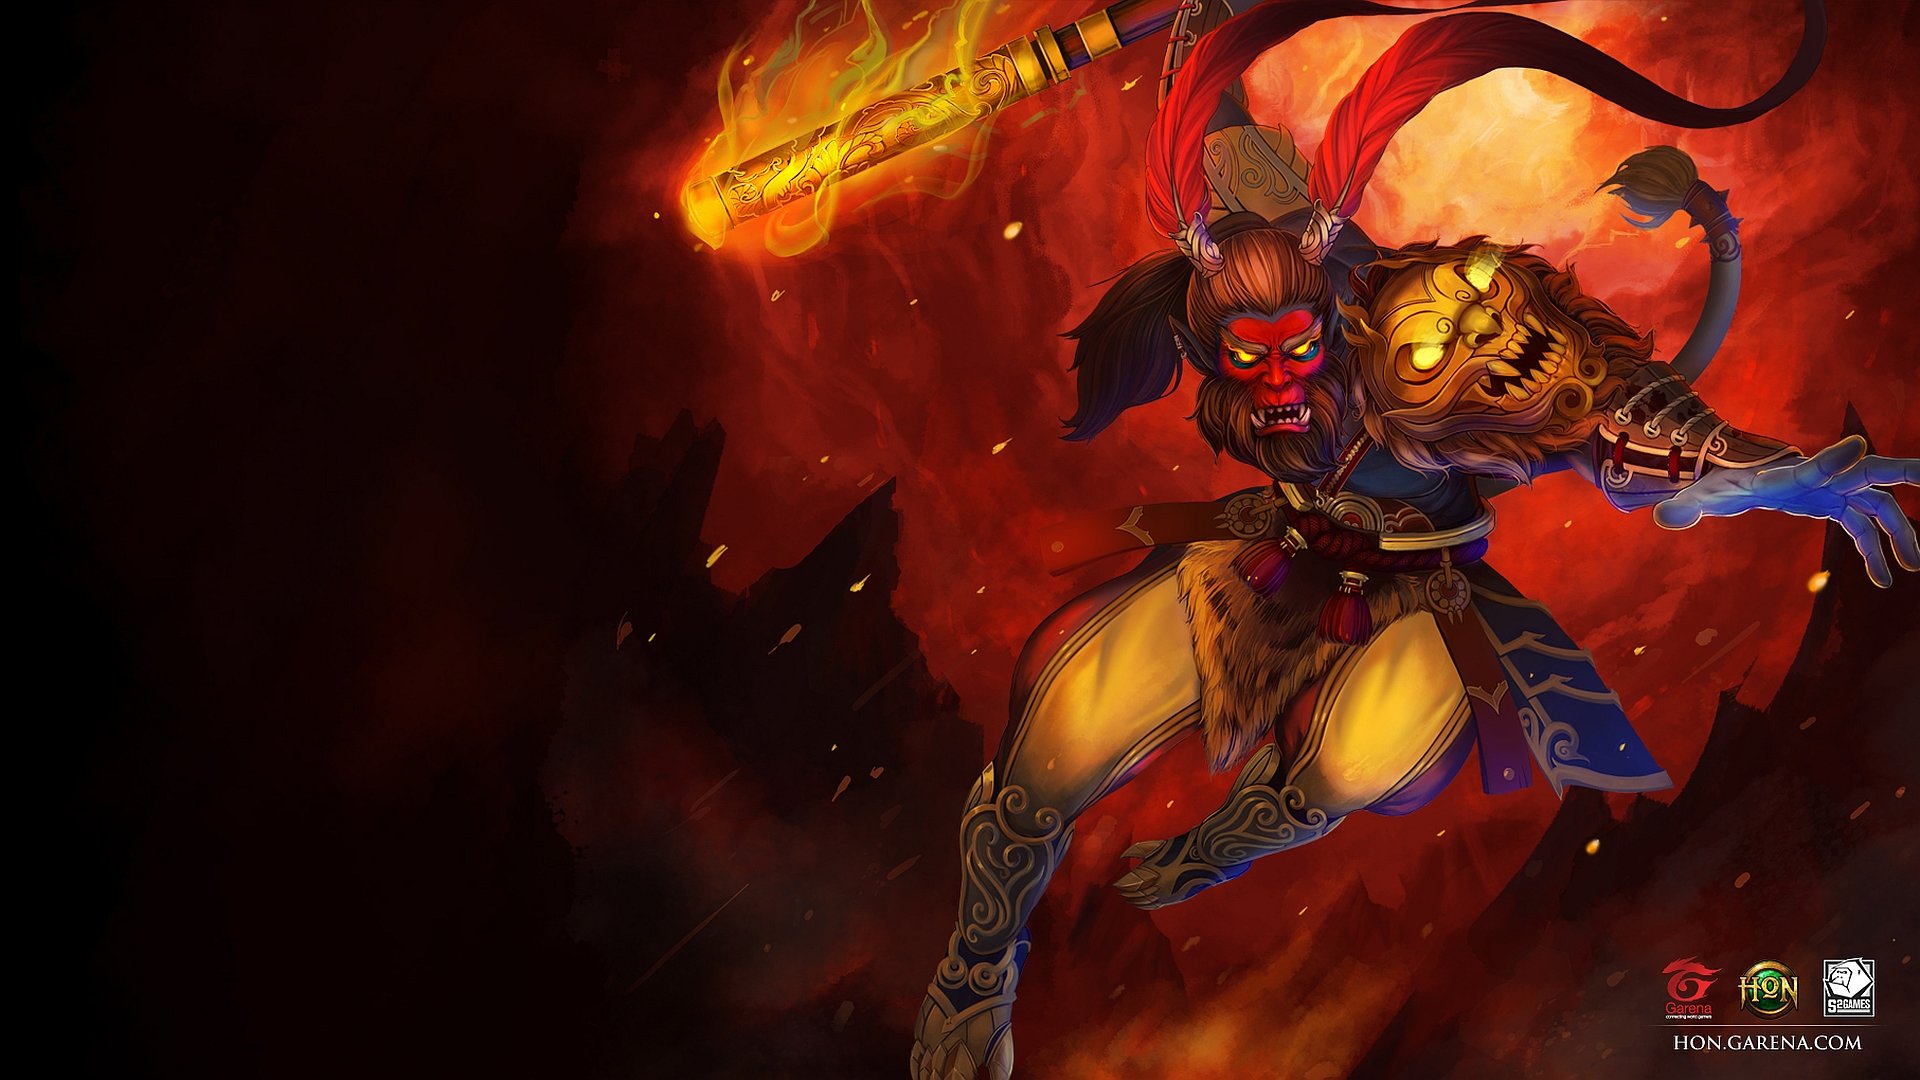 Best Heroes Of Newerth wallpaper ID:186047 for High Resolution full hd 1920x1080 computer